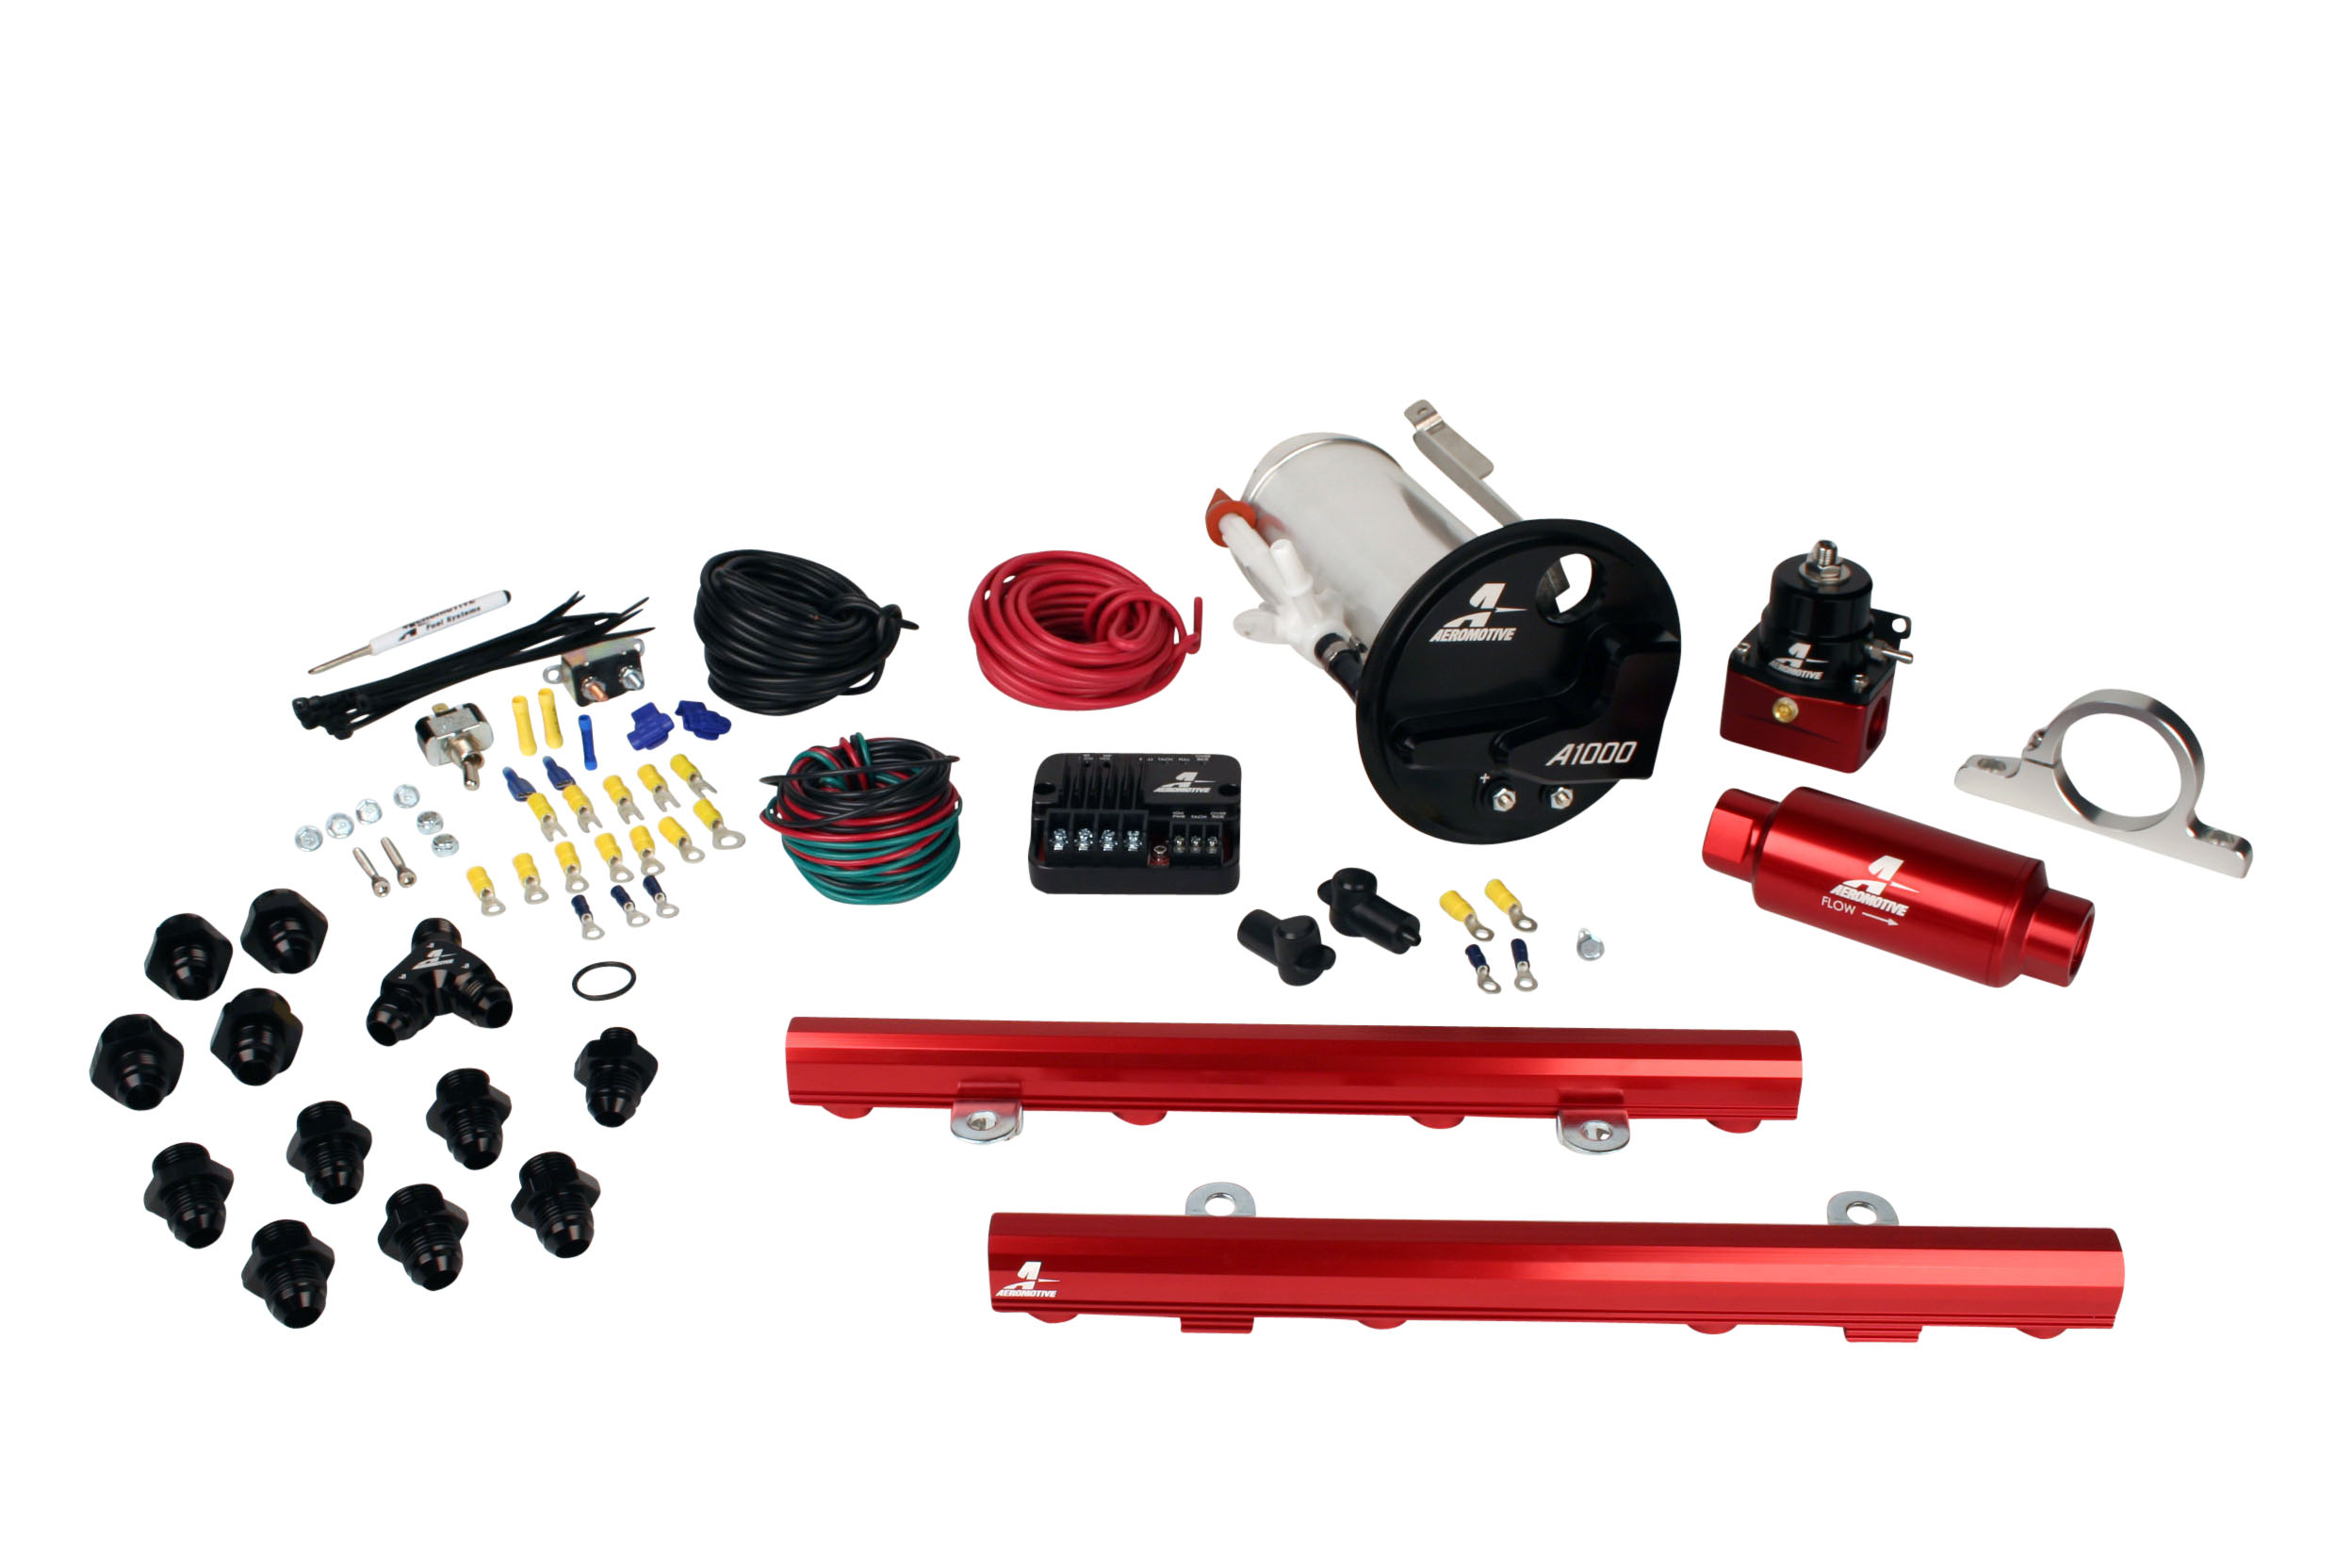 2007-2012 Ford Mustang Shelby GT500 Aeromotive Stealth A1000 Street Fuel System w/5.0L 4-V Fuel Rails